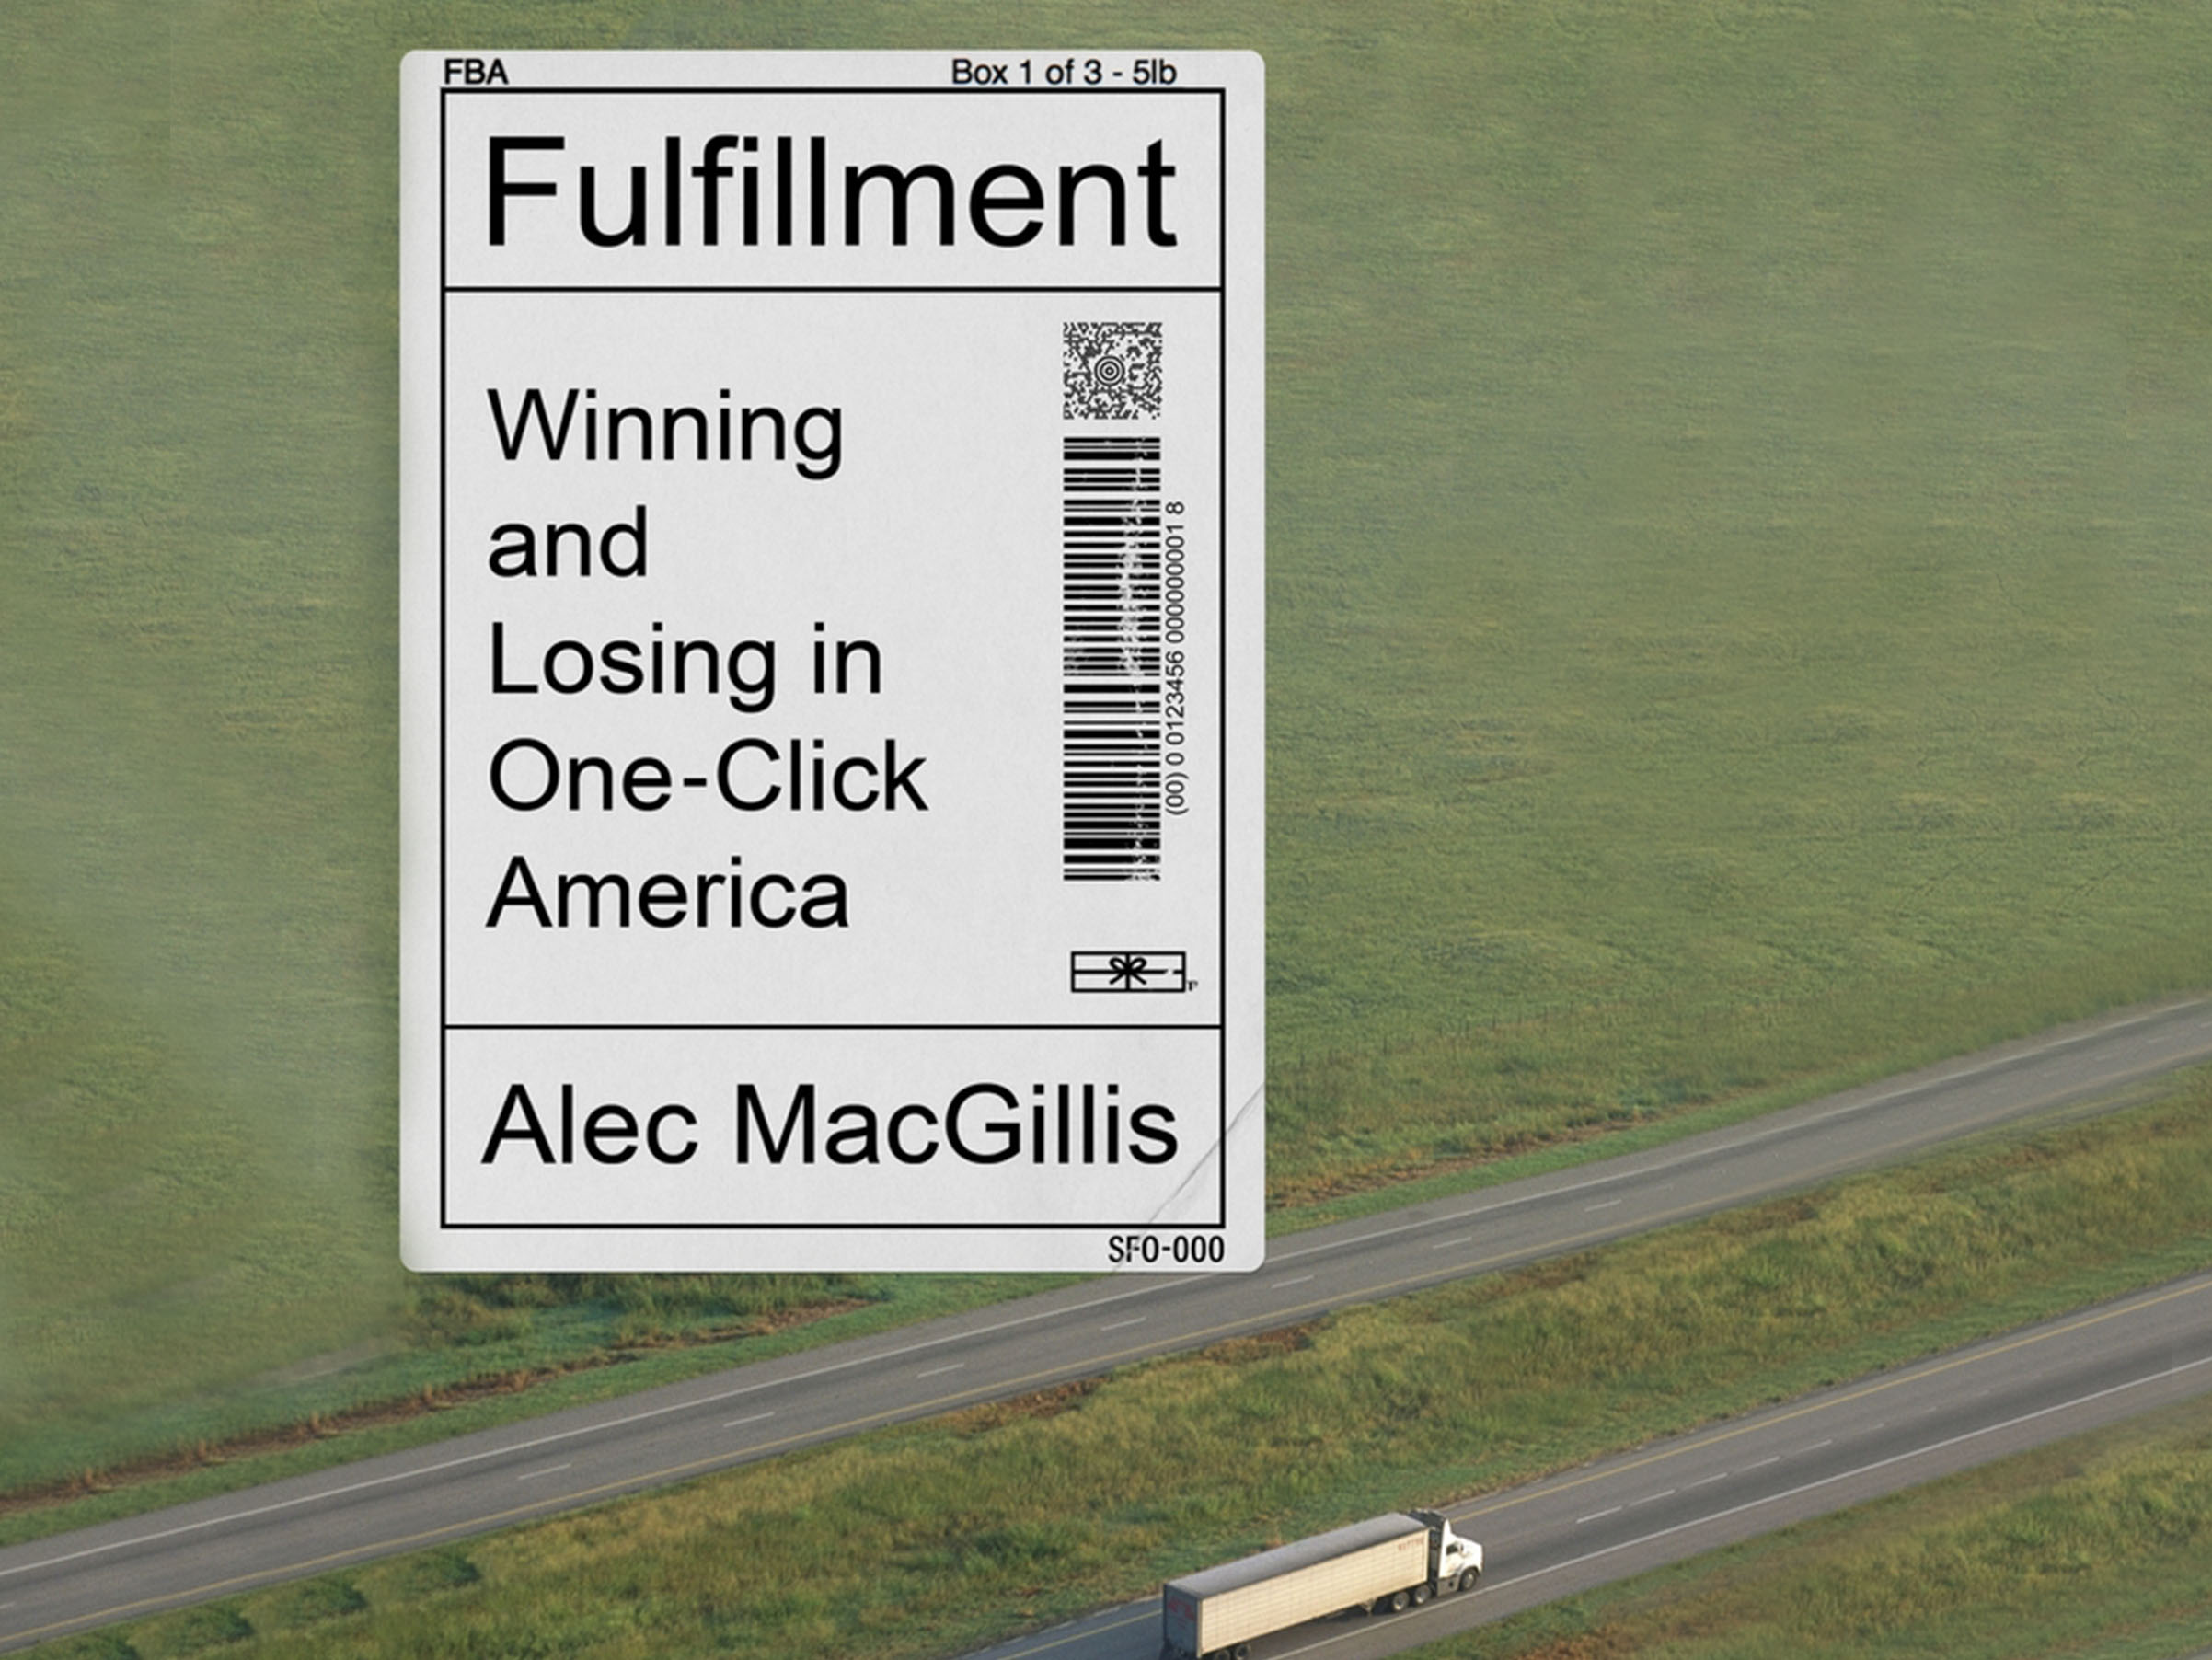 FULFILLMENT: Winning and Losing in One-Click America